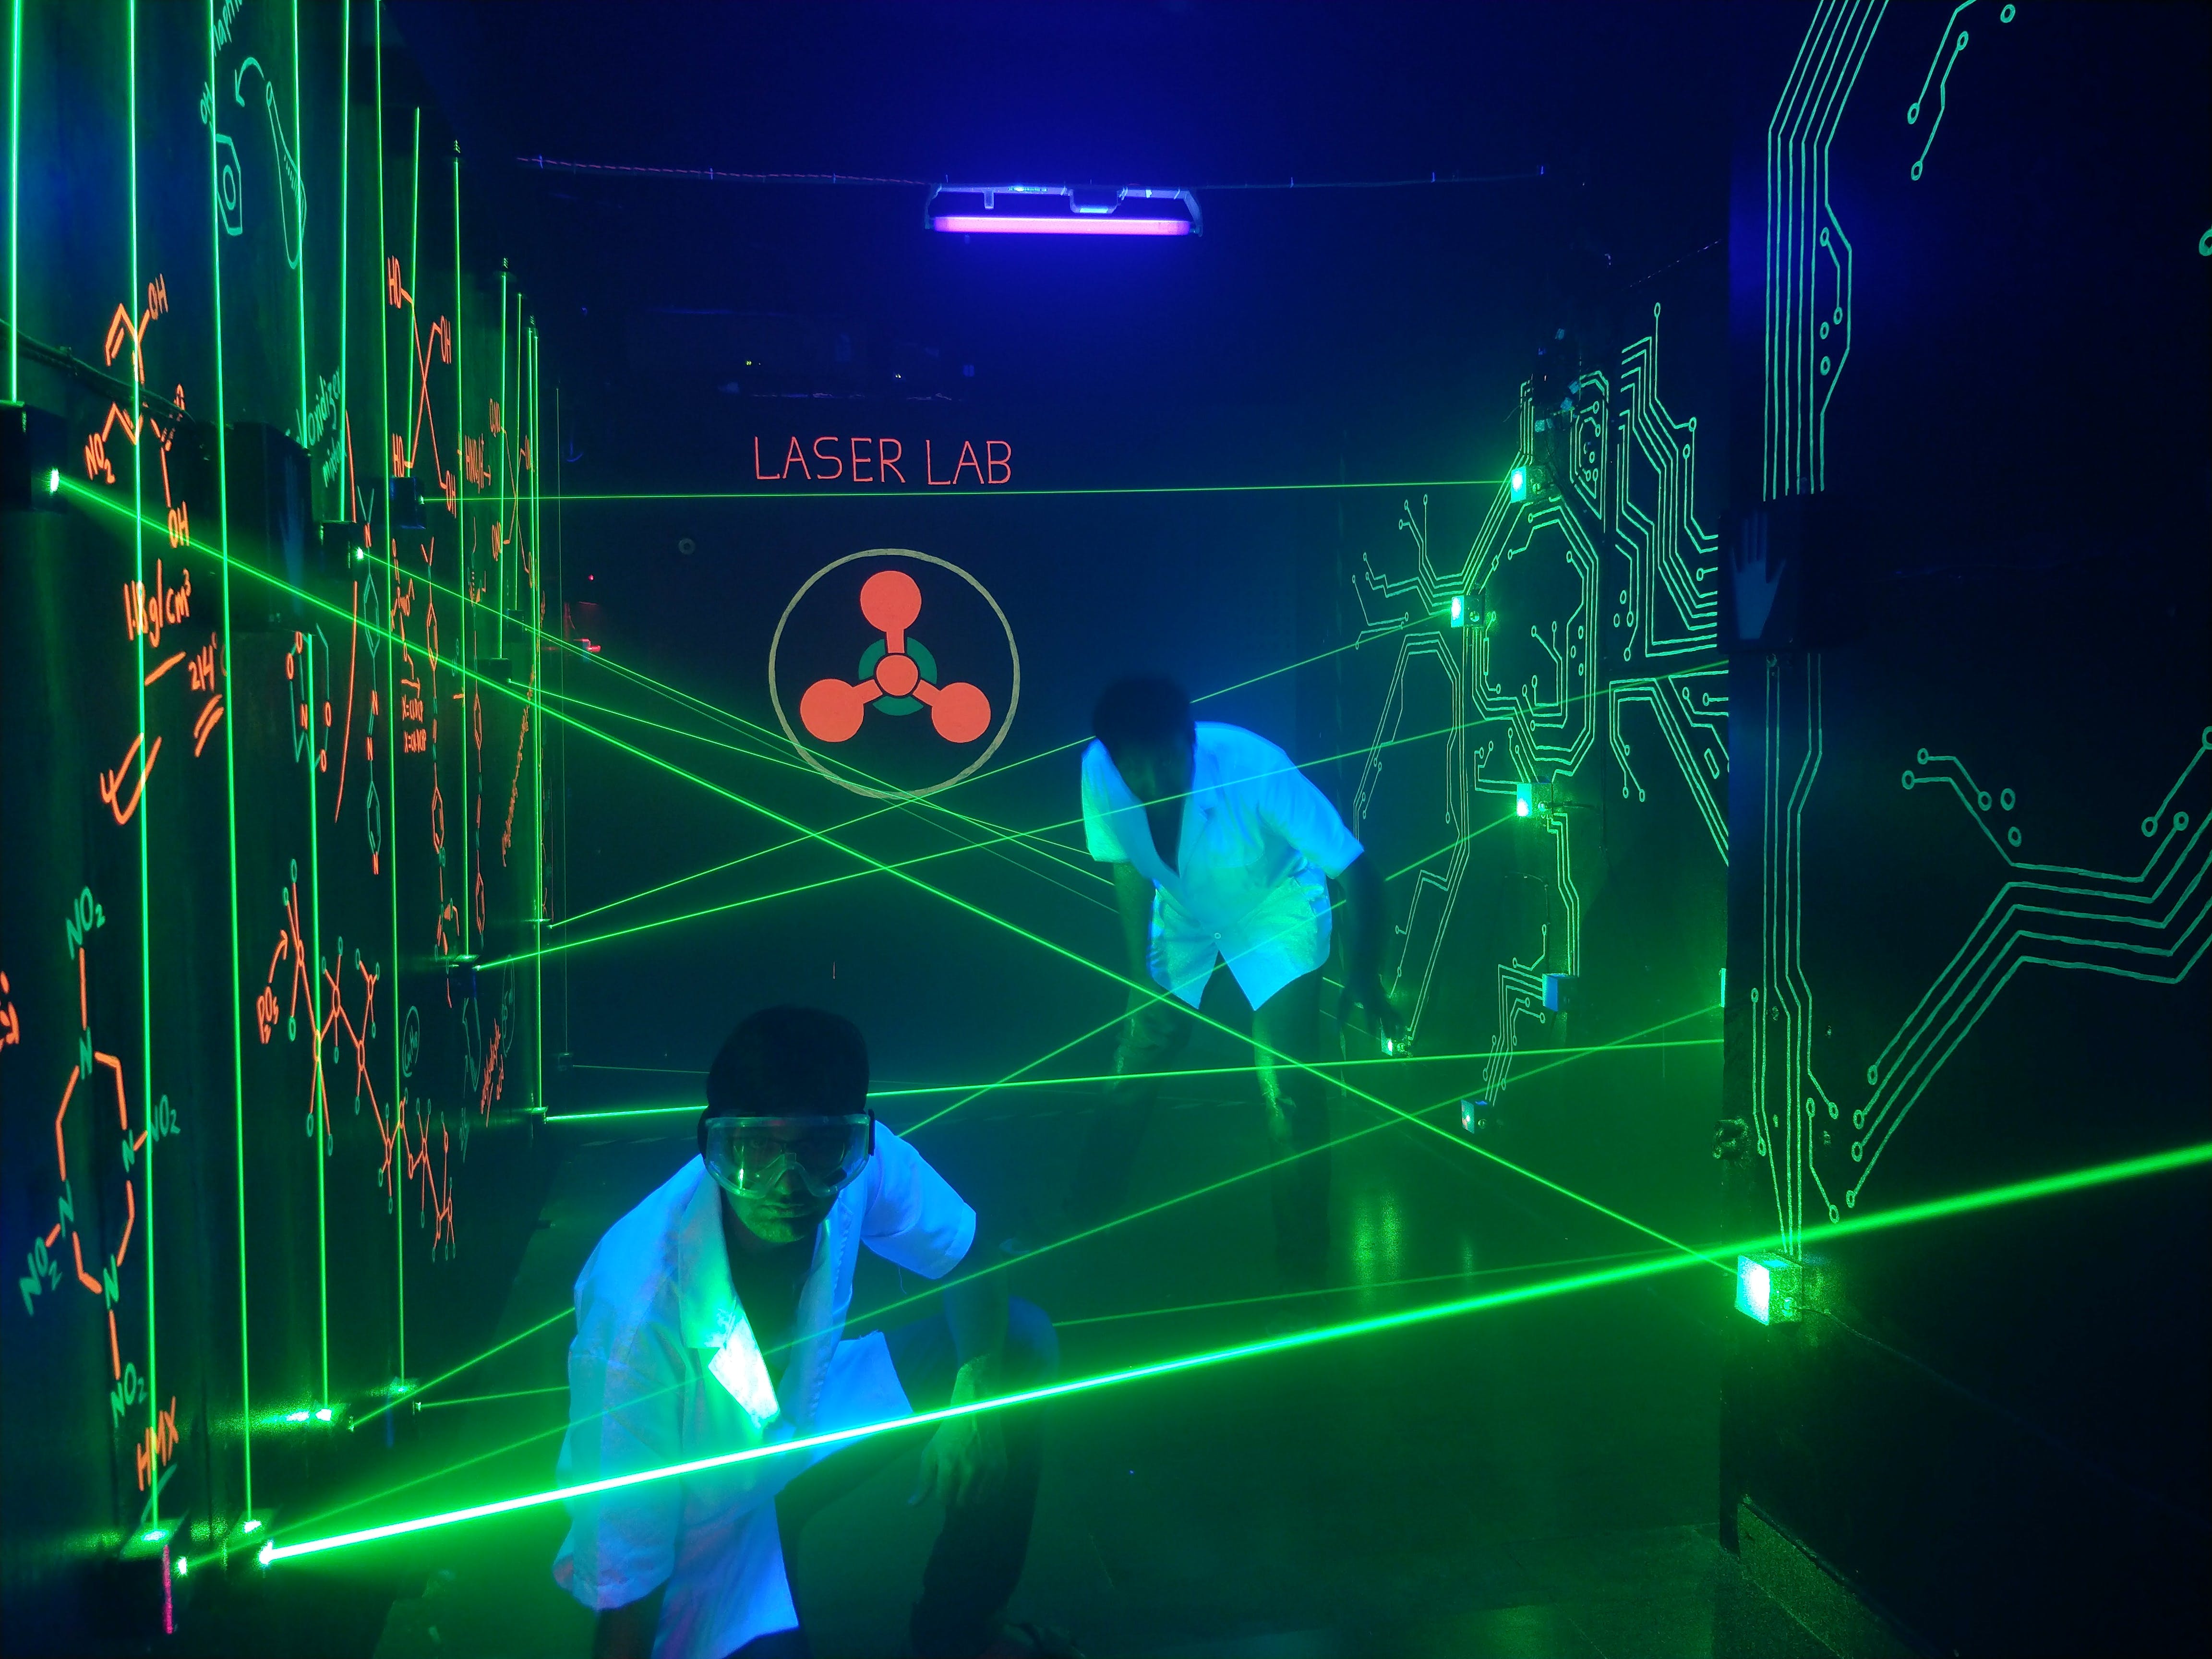 Visual effect lighting,Light,Green,Laser,Technology,Line,Laser tag,Electricity,Neon,Optoelectronics